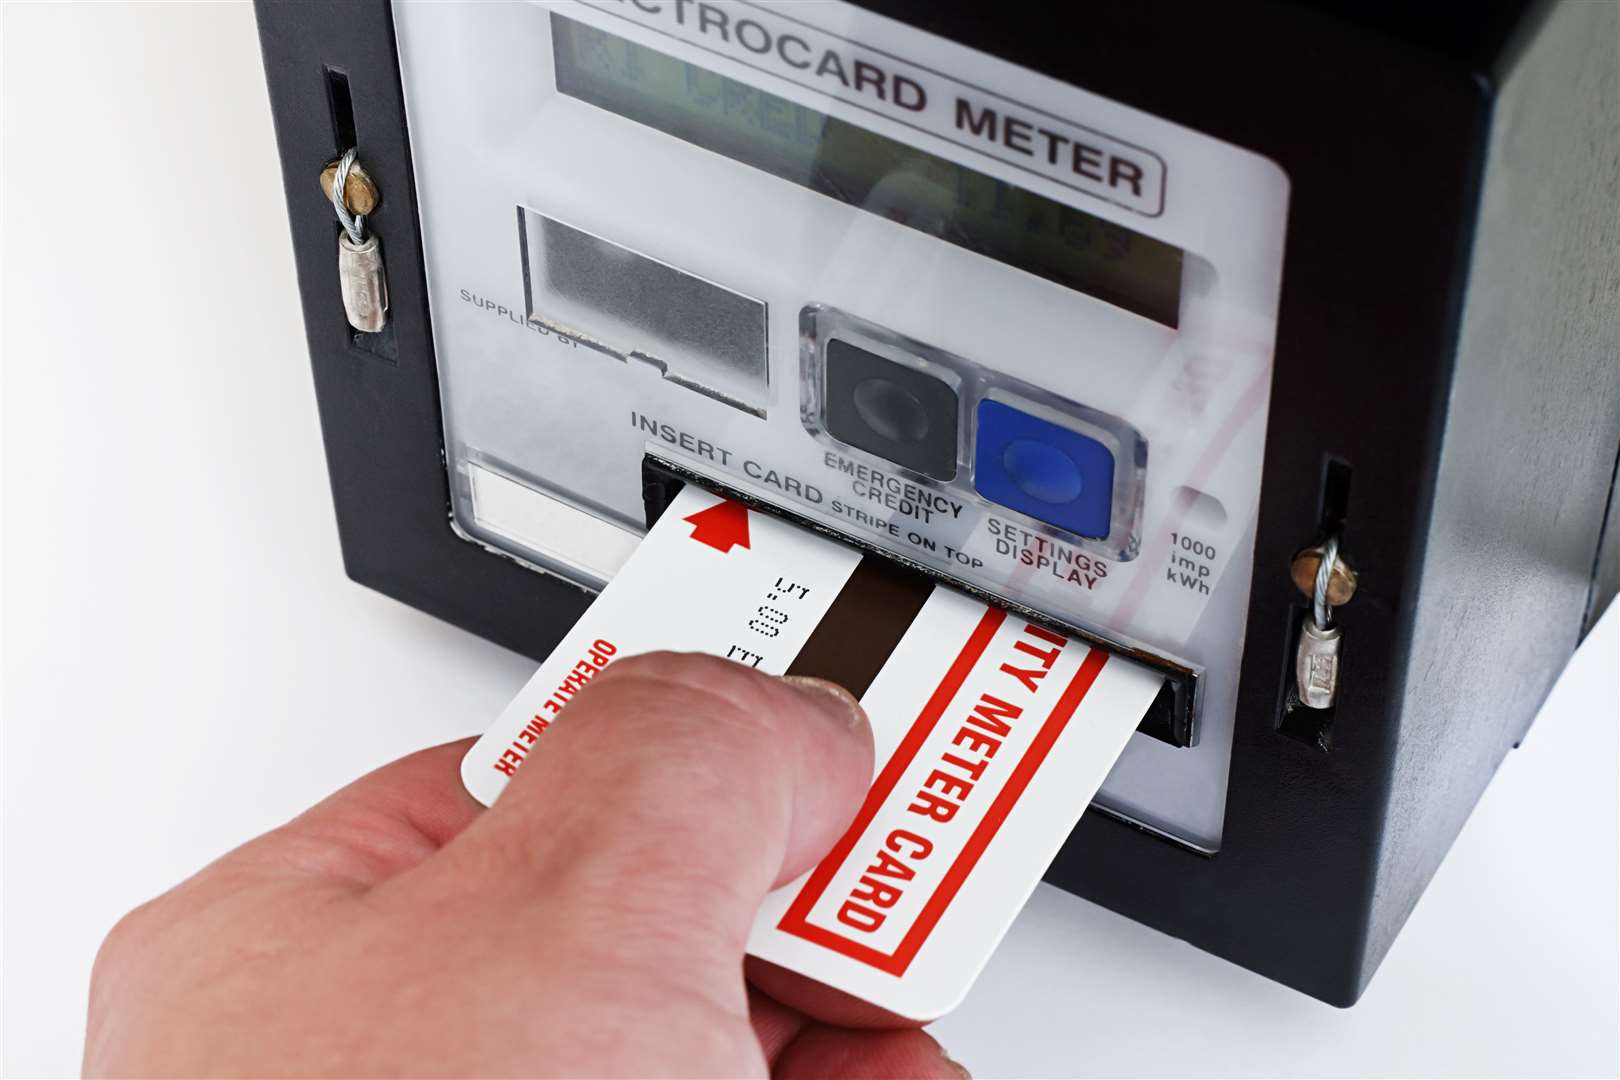 Older people in Moray who have prepayment meters are being urged to check they have redeemed their discount vouchers.